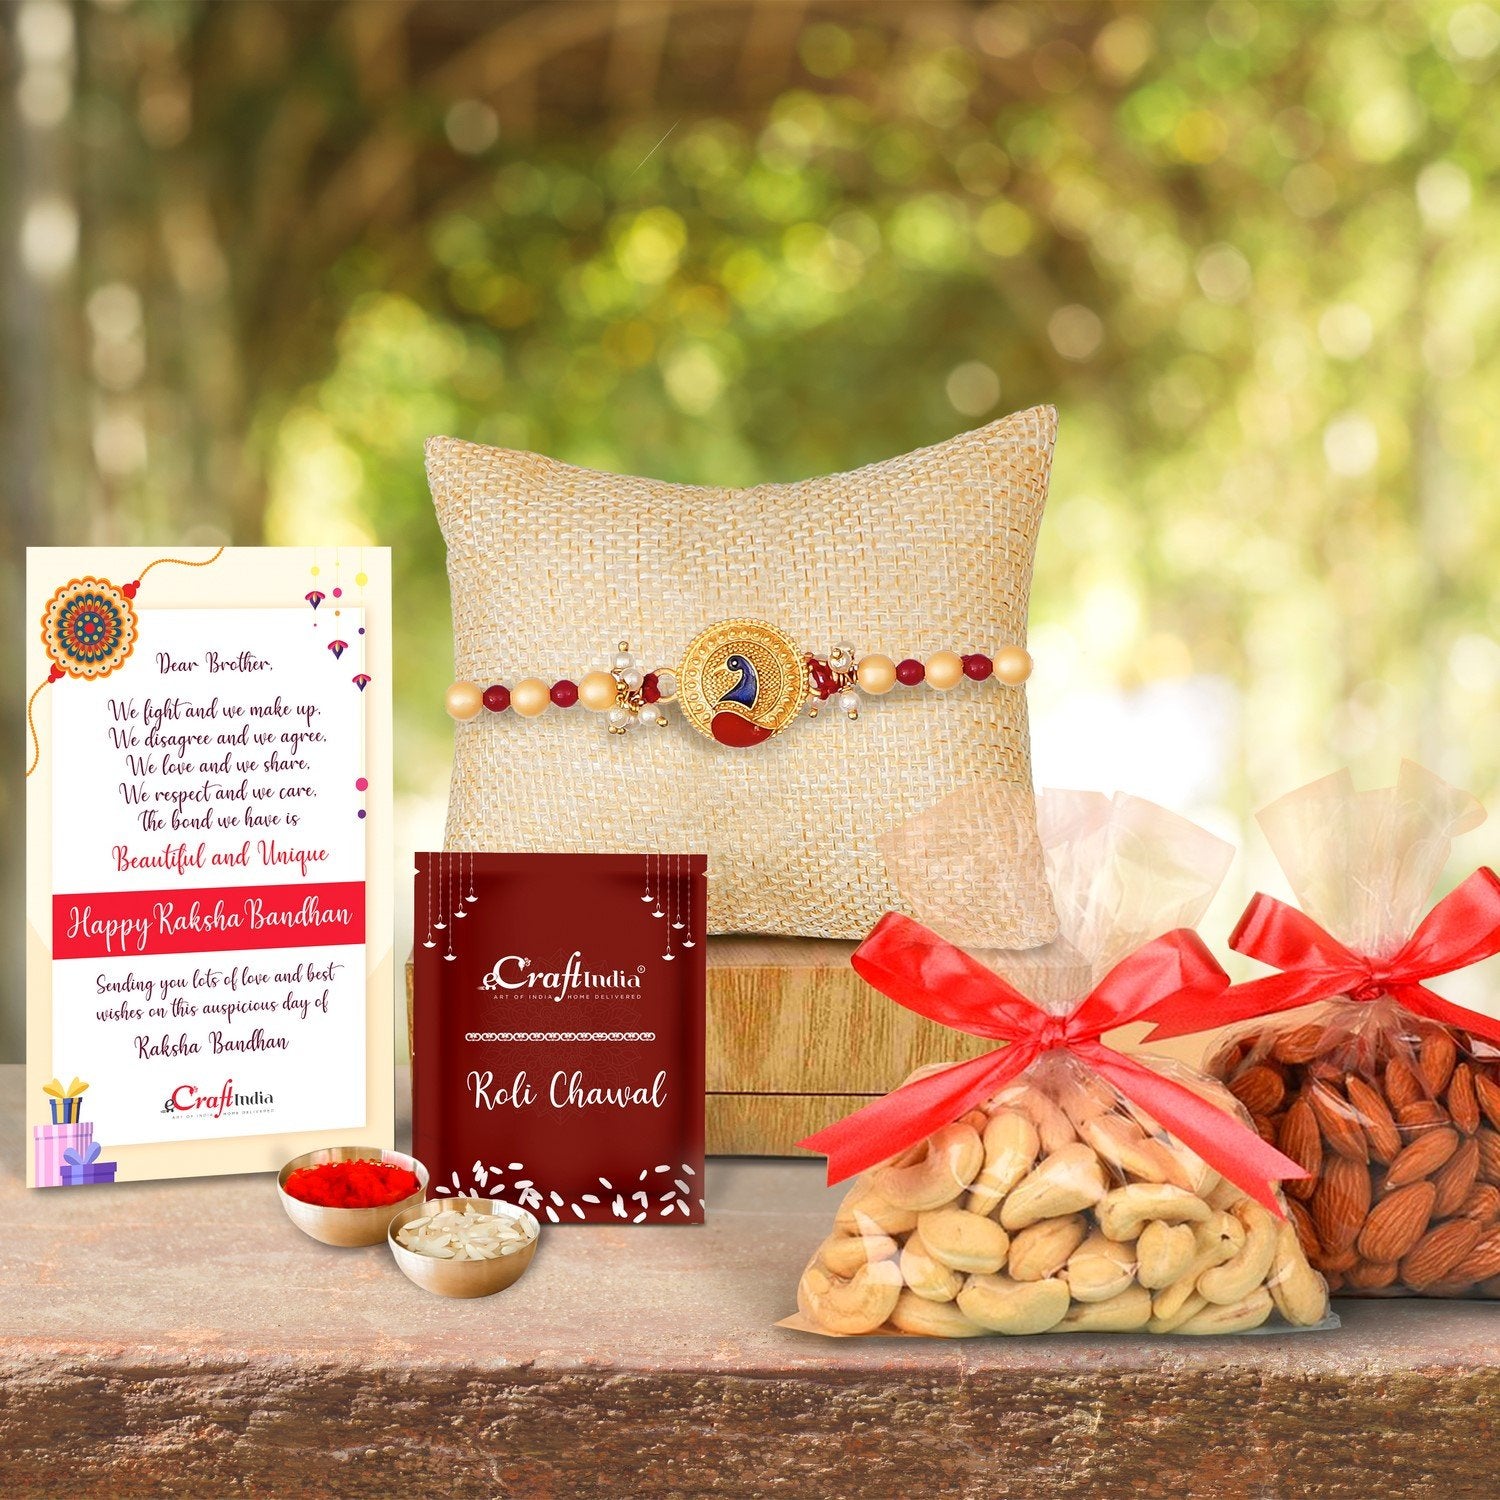 Designer Peacock Rakhi with Badam and Cashew (200 gm each, total 400 gm) and Roli Chawal Pack, Best Wishes Greeting Card